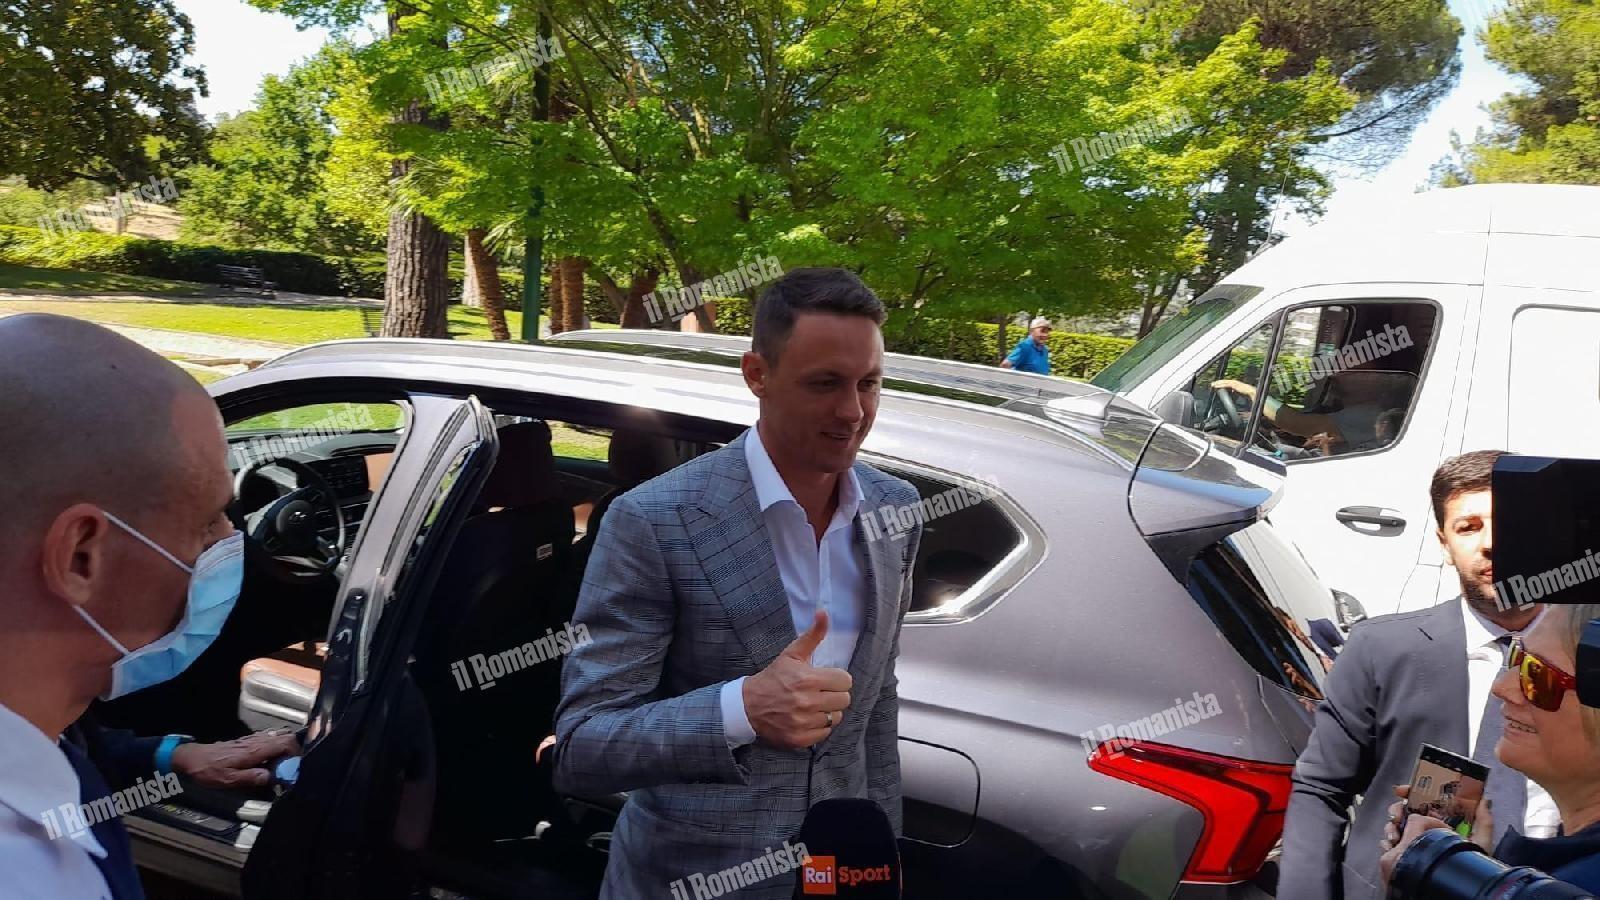 Matic arrives in Villa Stuart for medical tests before signing his contract with As Roma